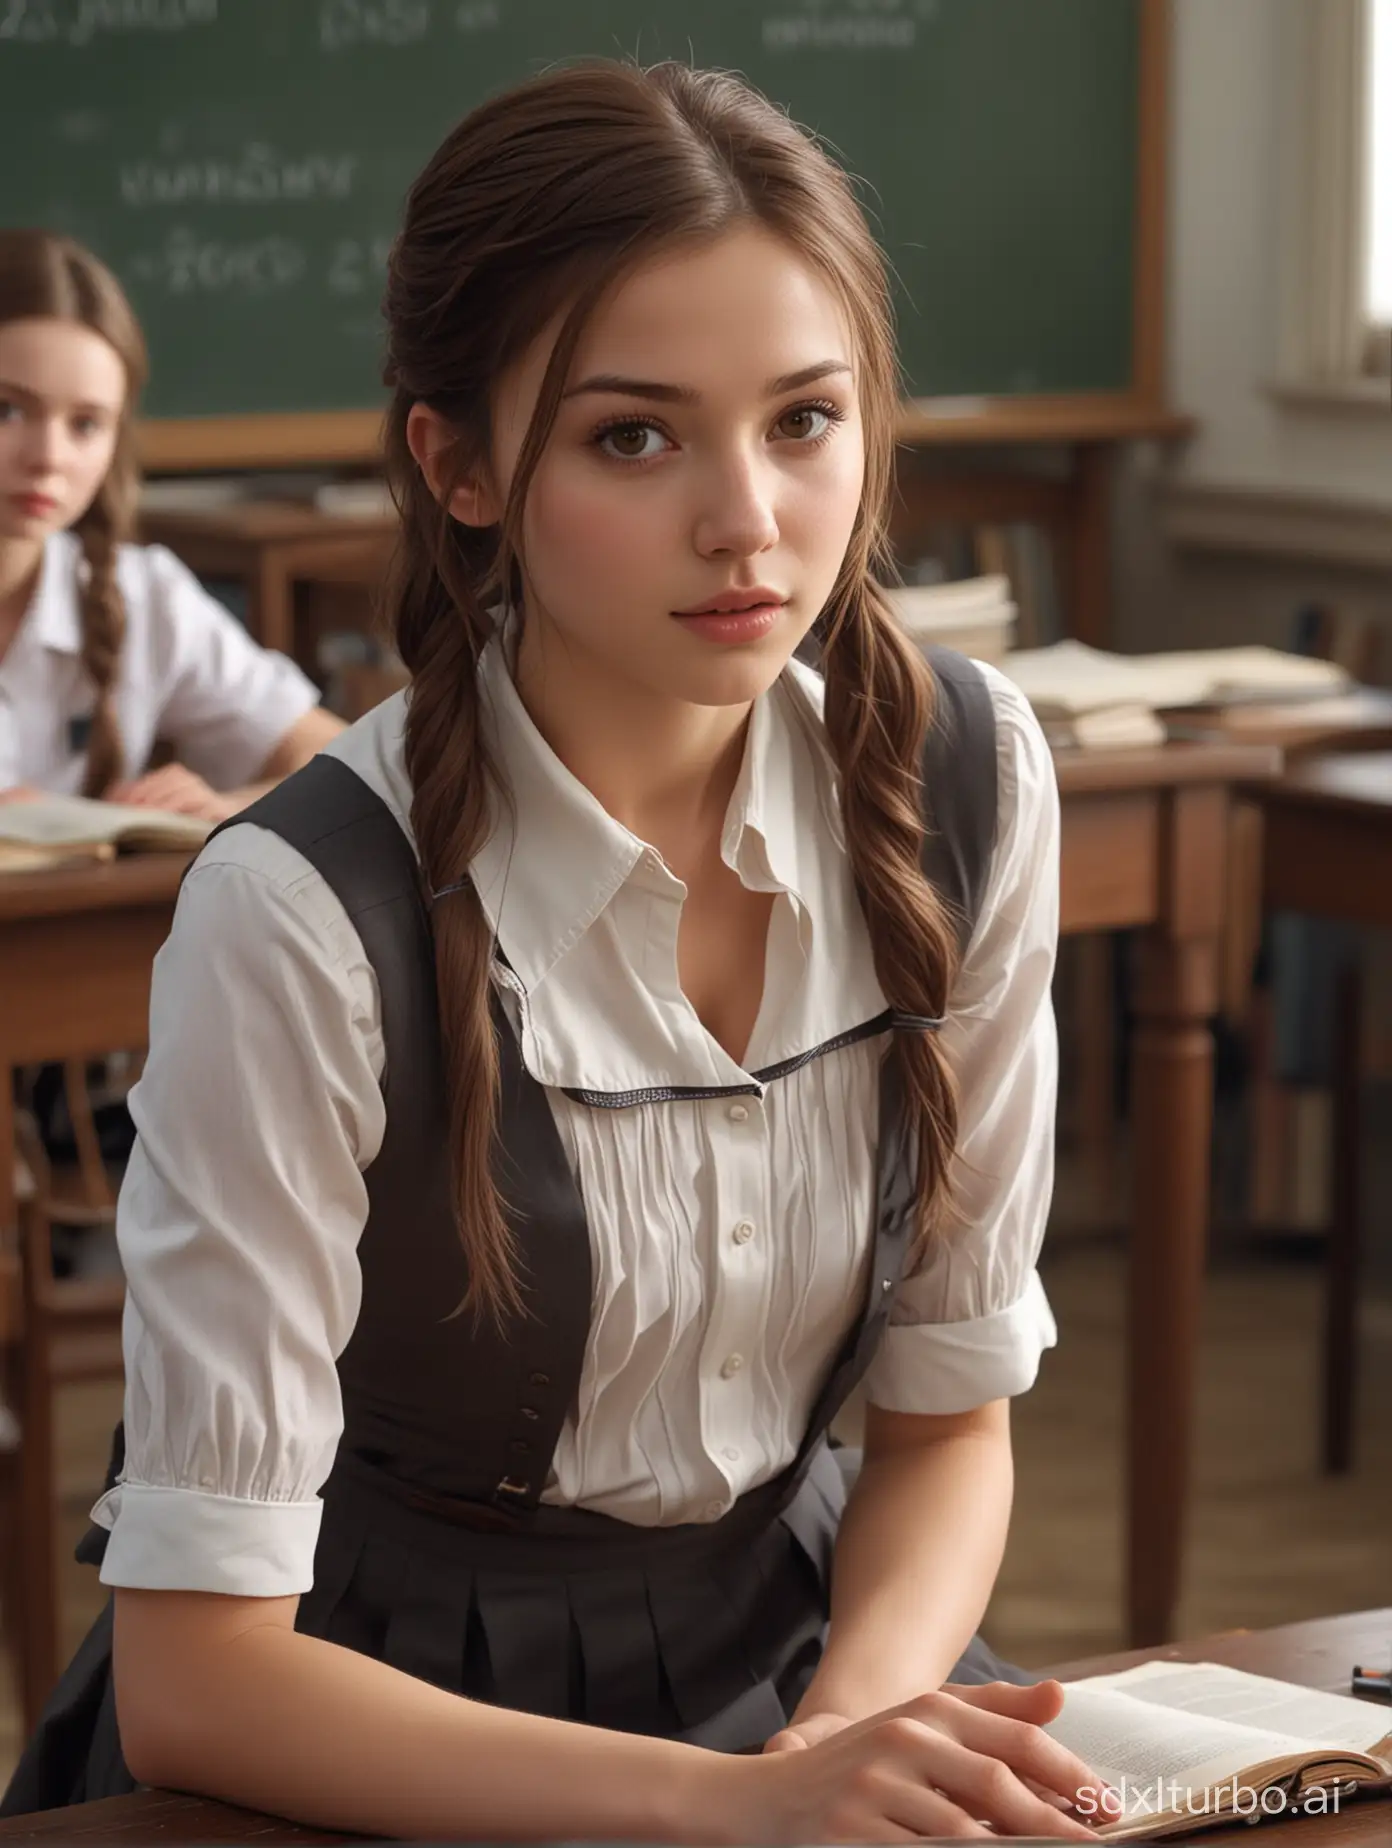 Best exquisite masterpiece photorealistic movie ultra detailed. Woman (25 years old) is adorably pretty beautiful, natural feminine beauty, white skin, soft brunette hair, brown eyes, hourglass figure, wearing schoolgirl uniform, shambolic dishevelled appearance, sweat, kneeling in a classroom, wide shot,